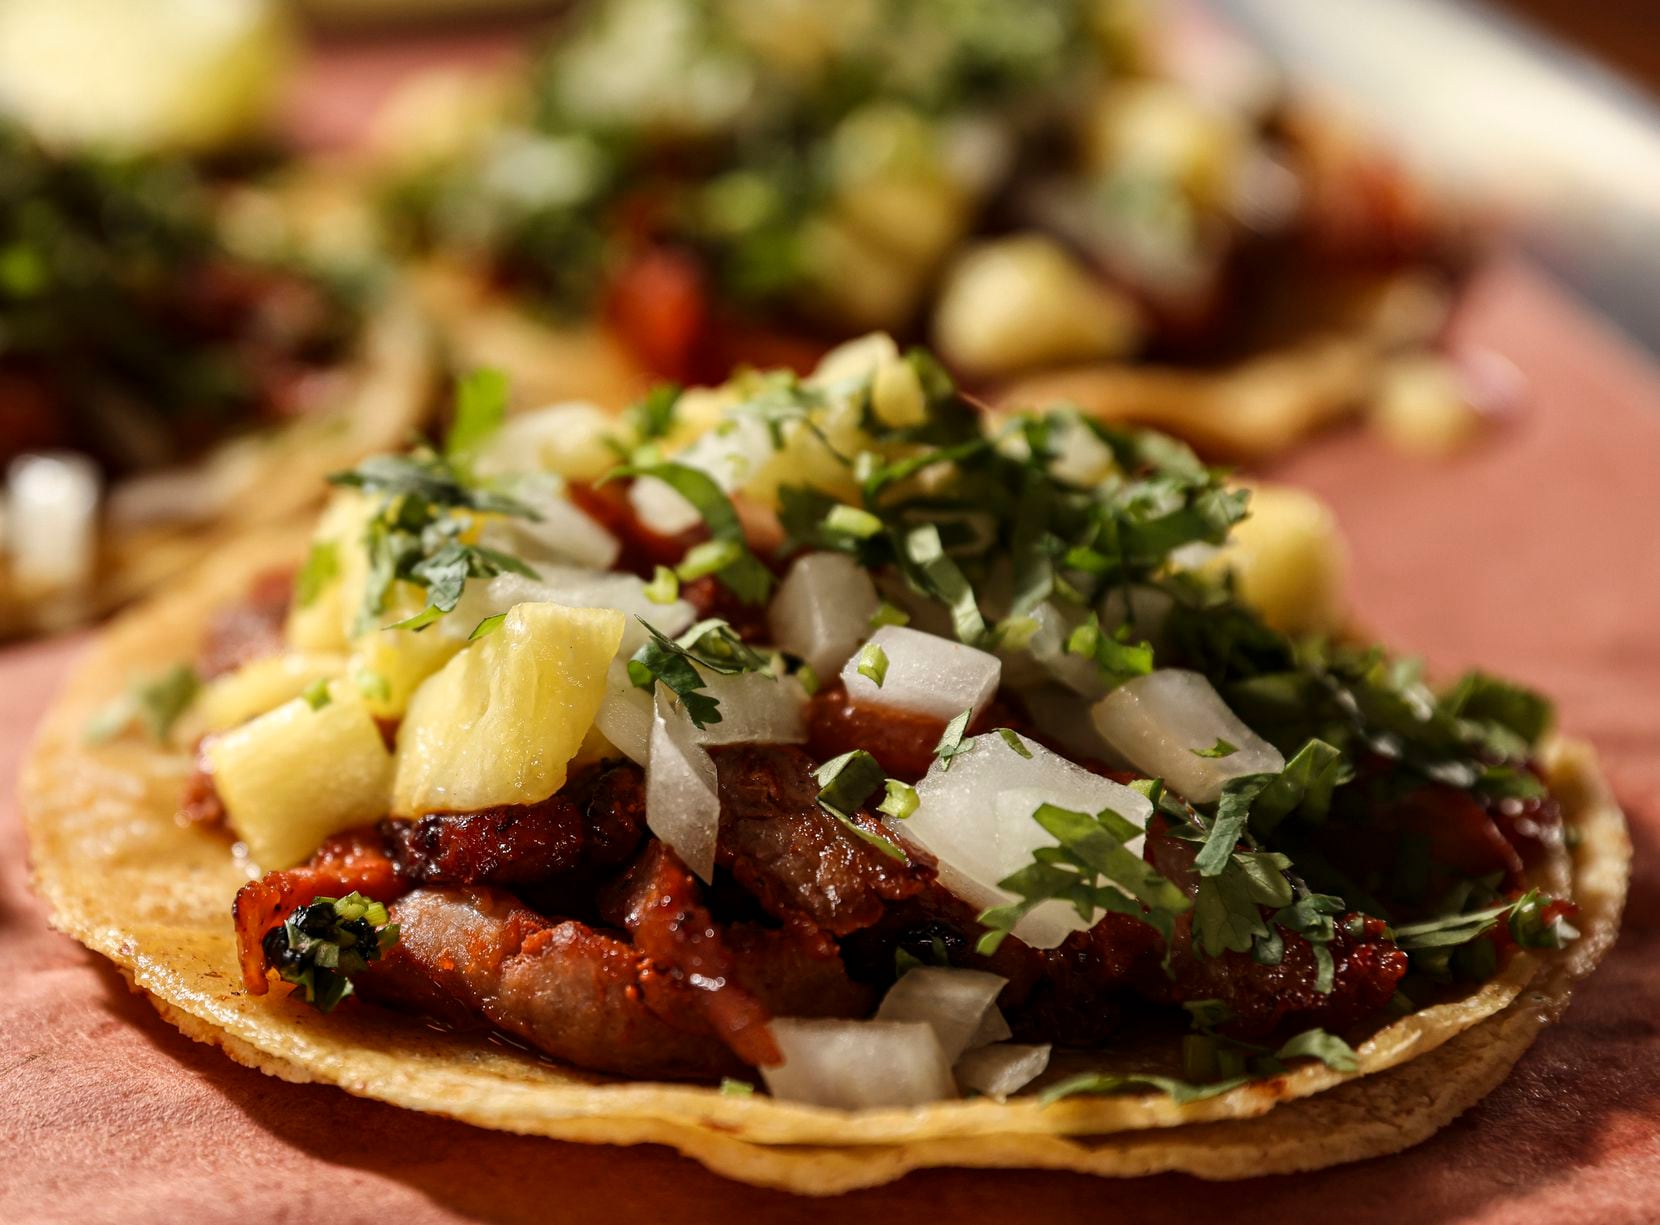 The co-owners of El Taco H are most proud of the pork and pineapple tacos al pastor.